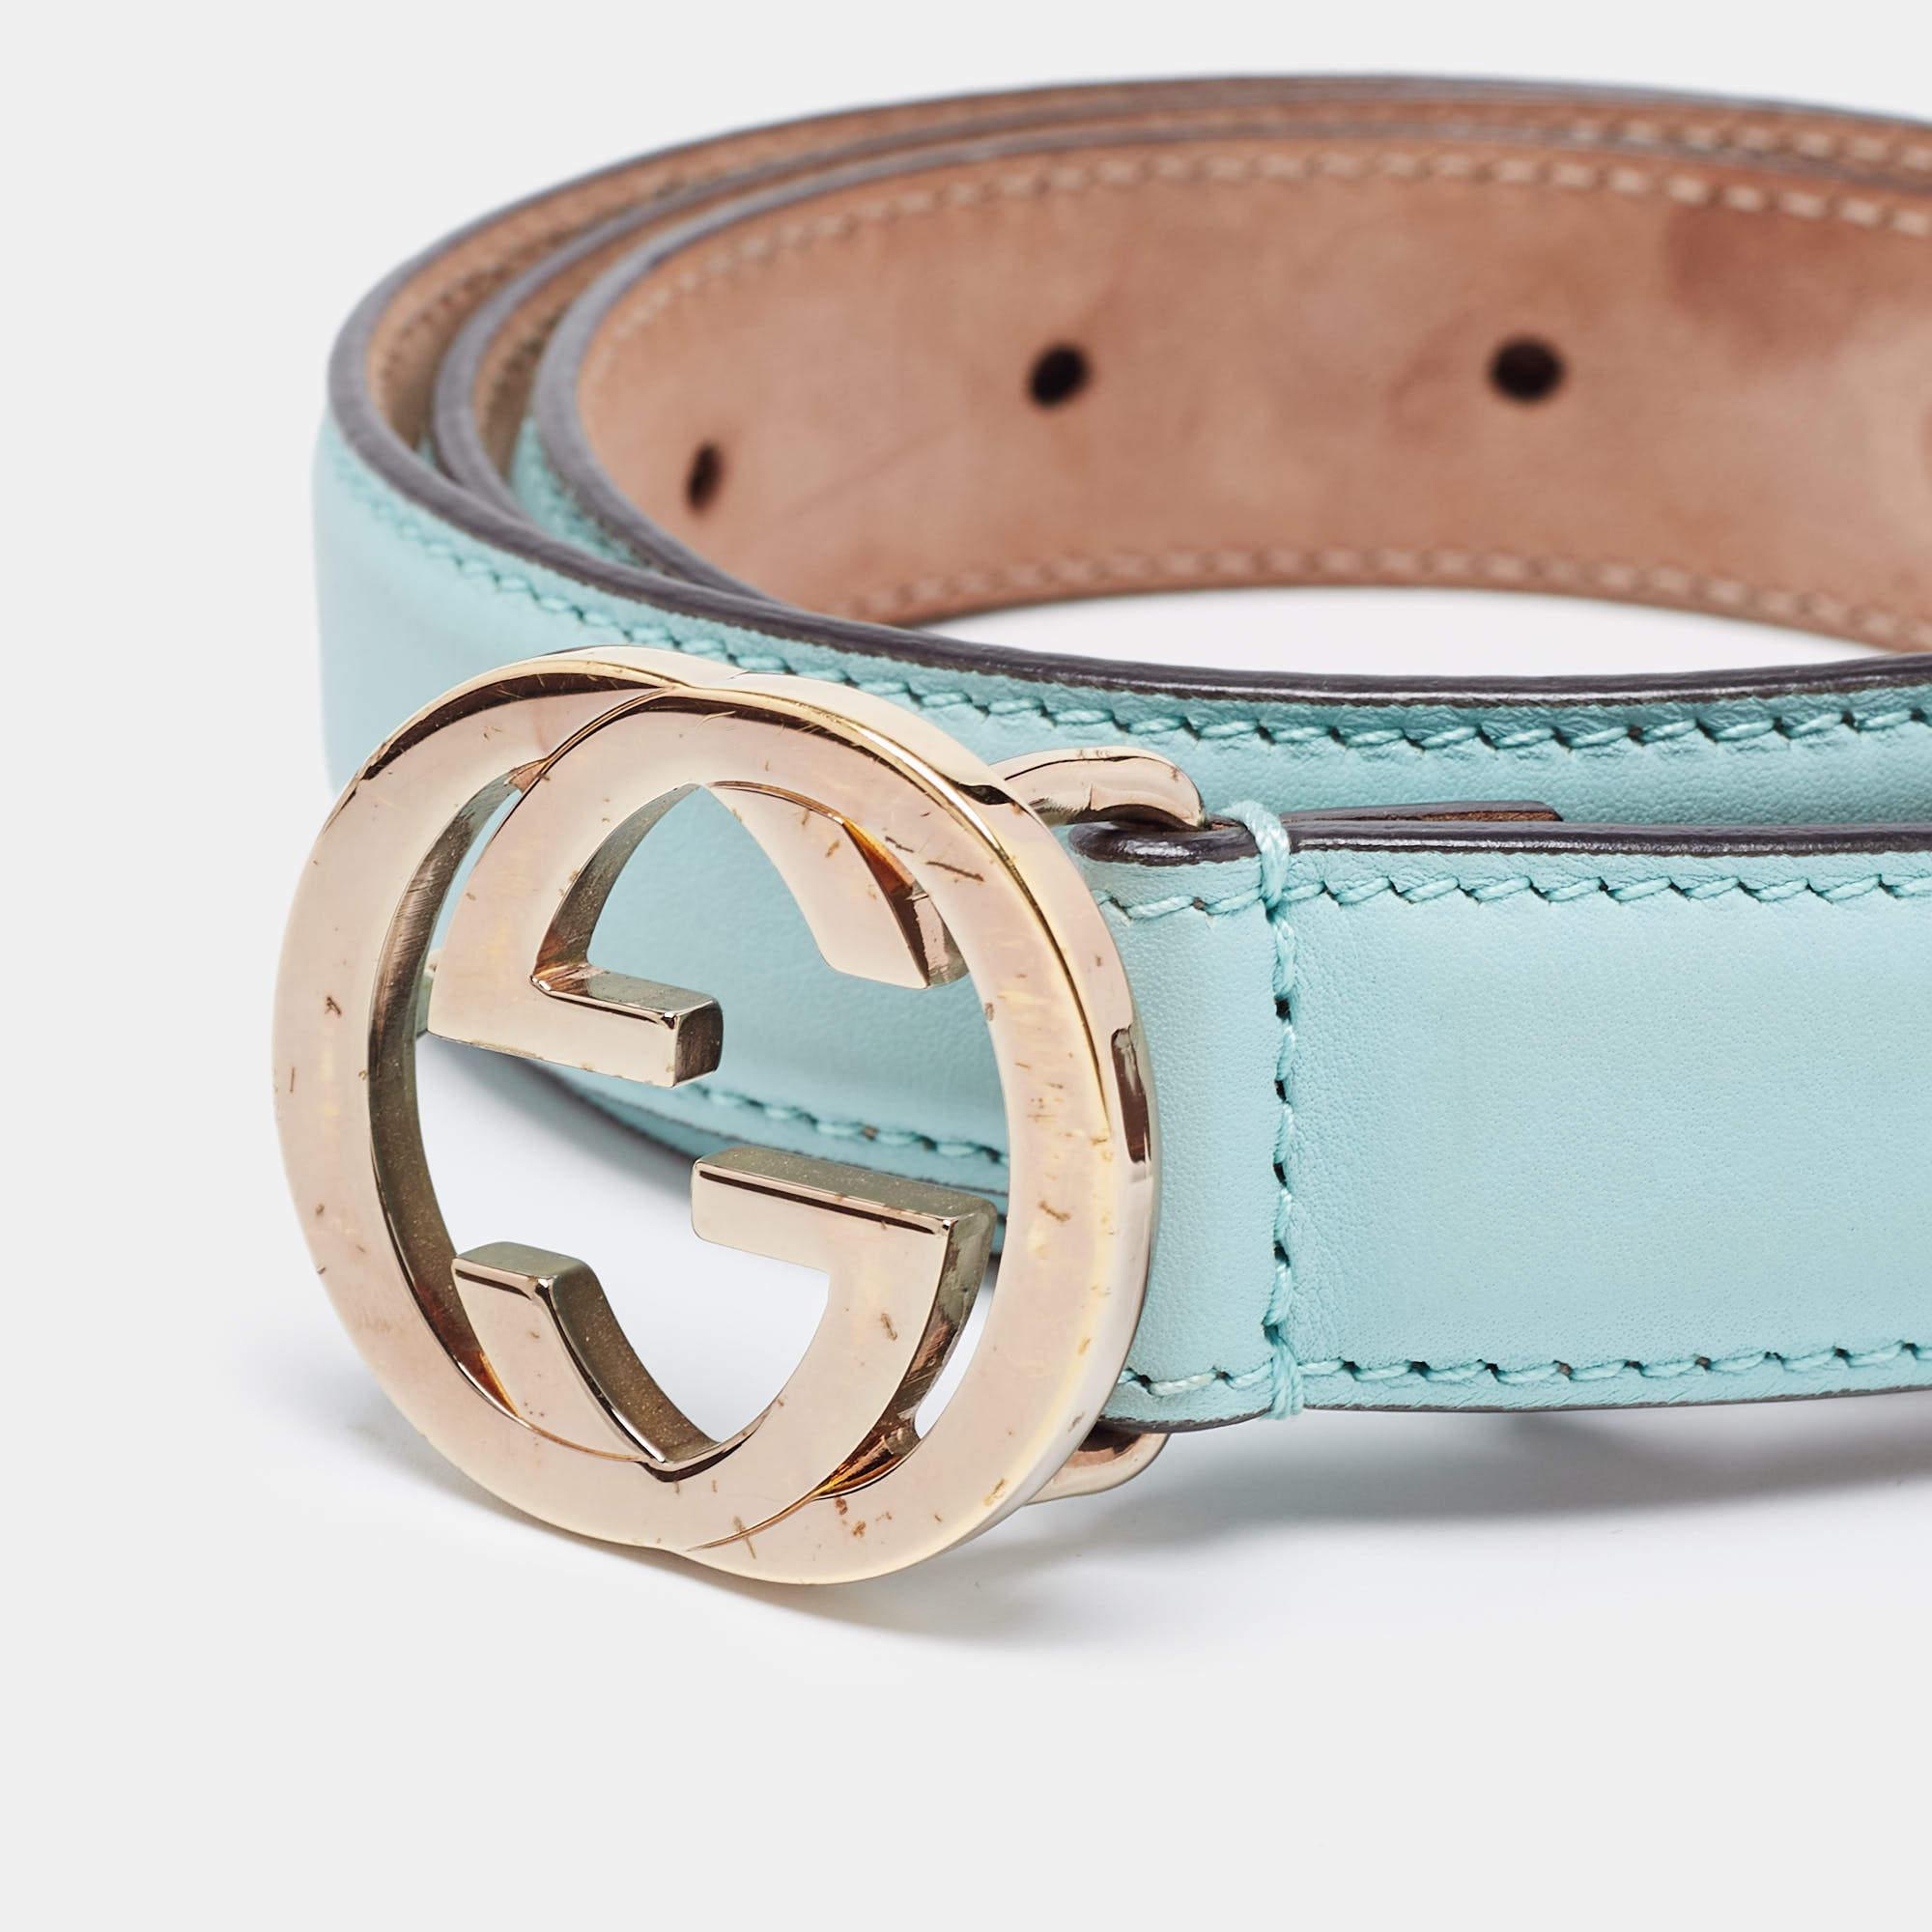 Your belt collection will get a stylish update with this Gucci creation. The luxe accessory is crafted from leather and added with the signature interlocking 'G' buckle in gold-tone metal.

